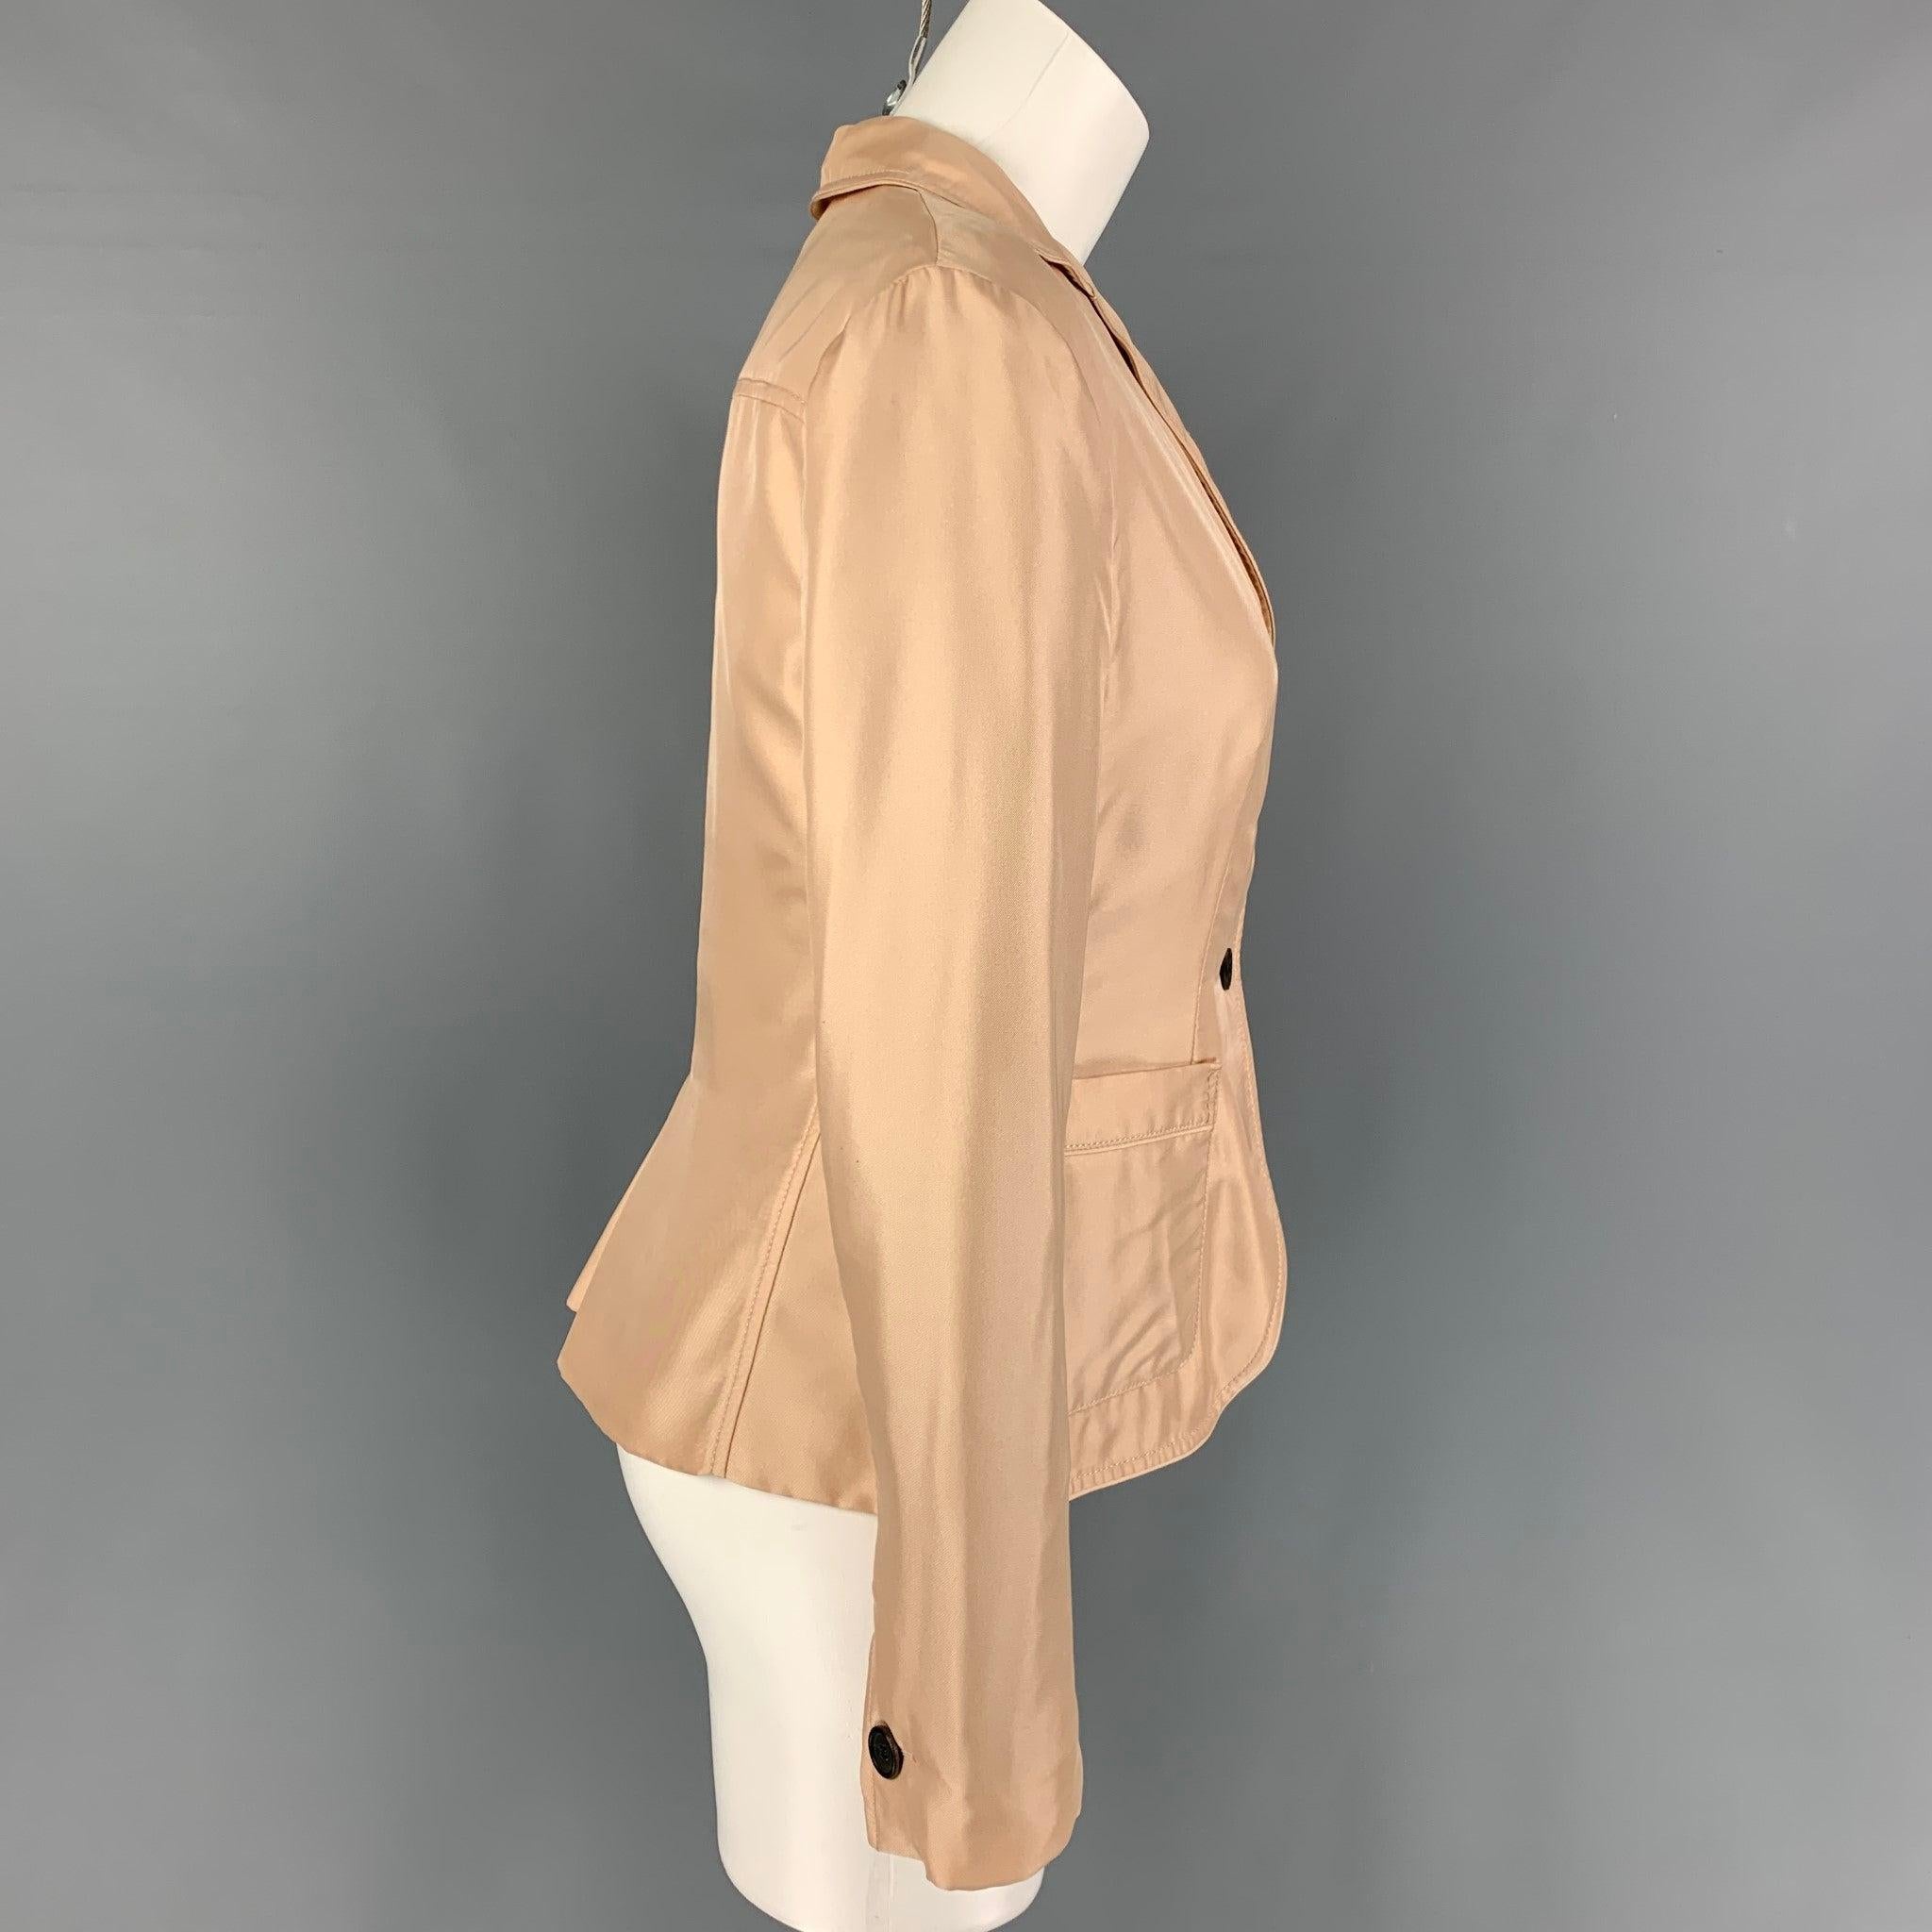 PRADA jacket comes in a blush silk featuring a notch lapel, patch pockets, single back vent, and a three button closure. Made in Italy.
Good
Pre-Owned Condition.
Light marks at back. As-Is.  

Marked:   40 

Measurements: 
 
Shoulder: 16 inches 